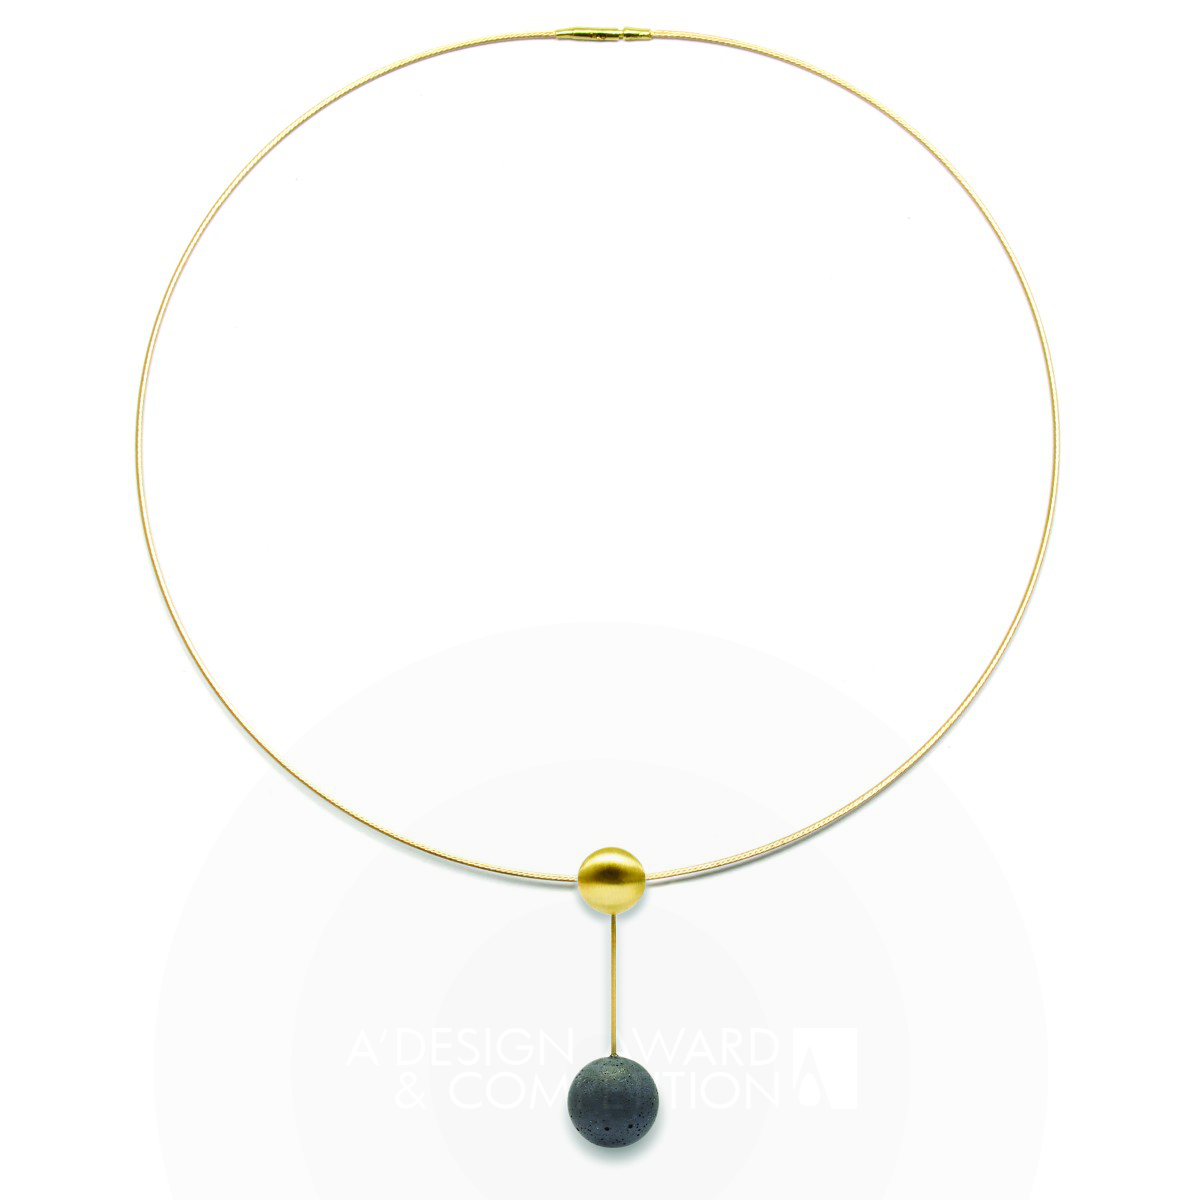 Orbis Gold and Concrete Jewellery  Necklace by Karen Konzuk